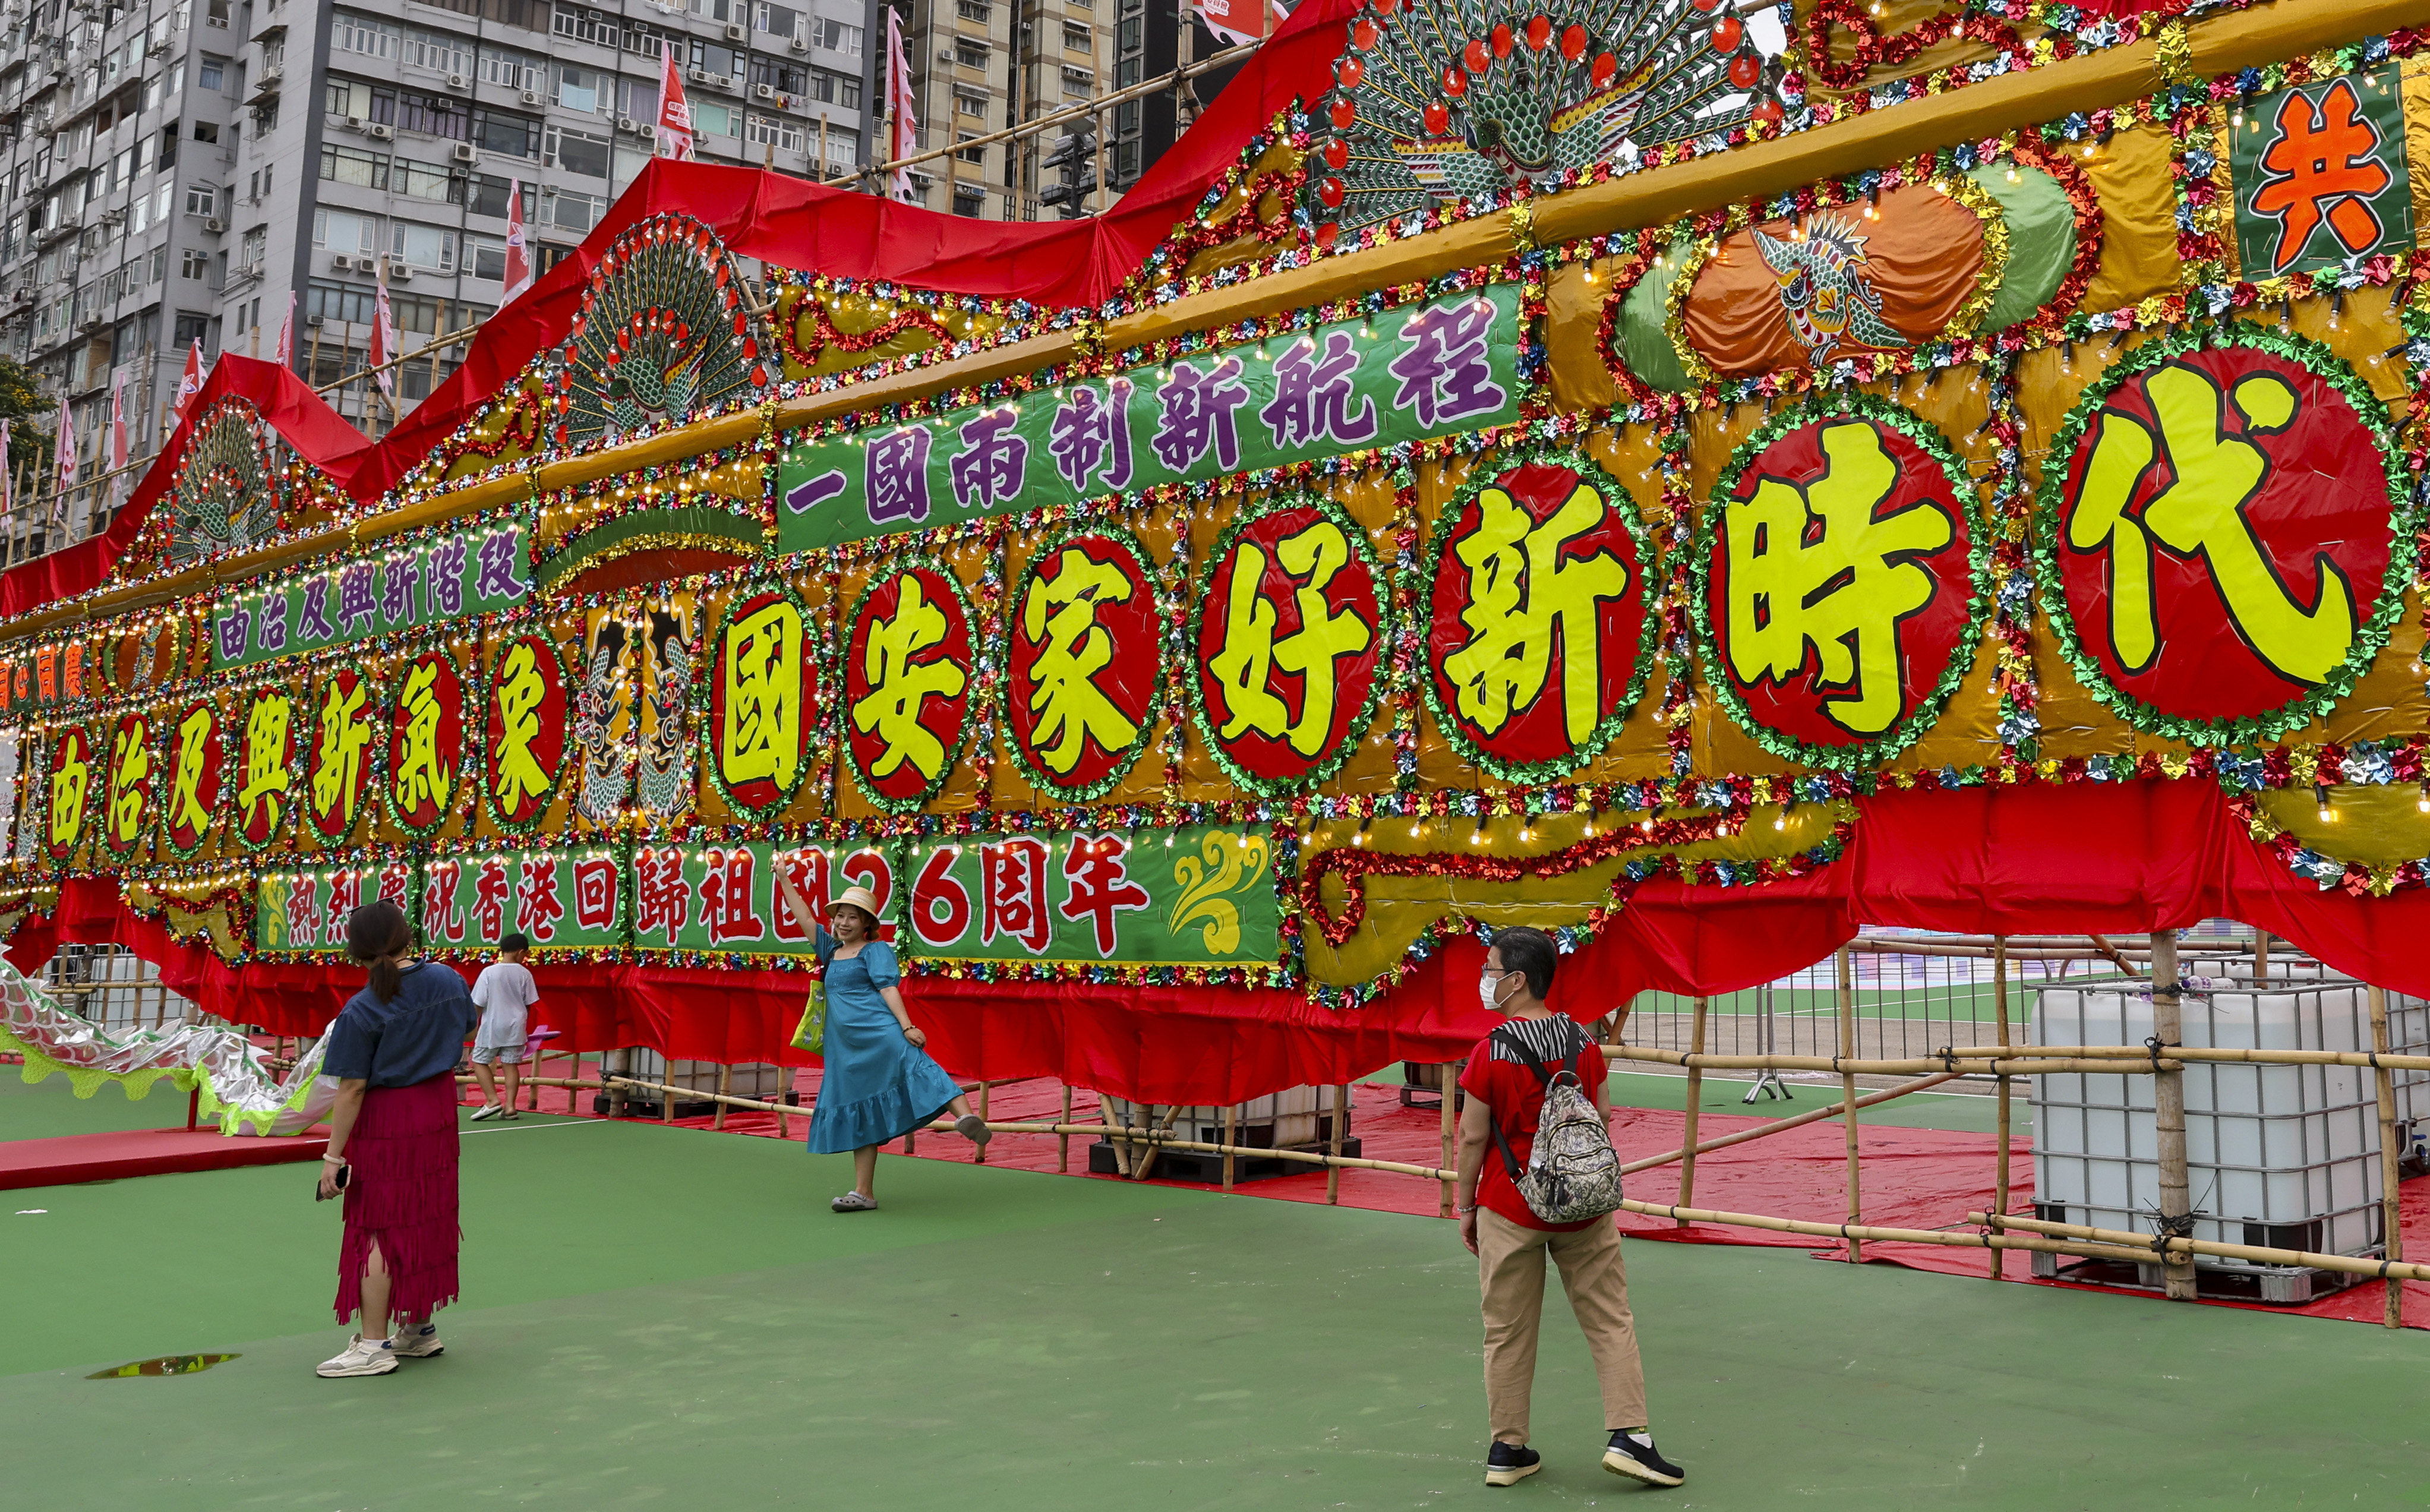 Visitors attended a carnival held by pro-Beijing groups on the 26th anniversary of the establishment of the Hong Kong Special Administrative Region. Photo: Yik Yeung-man